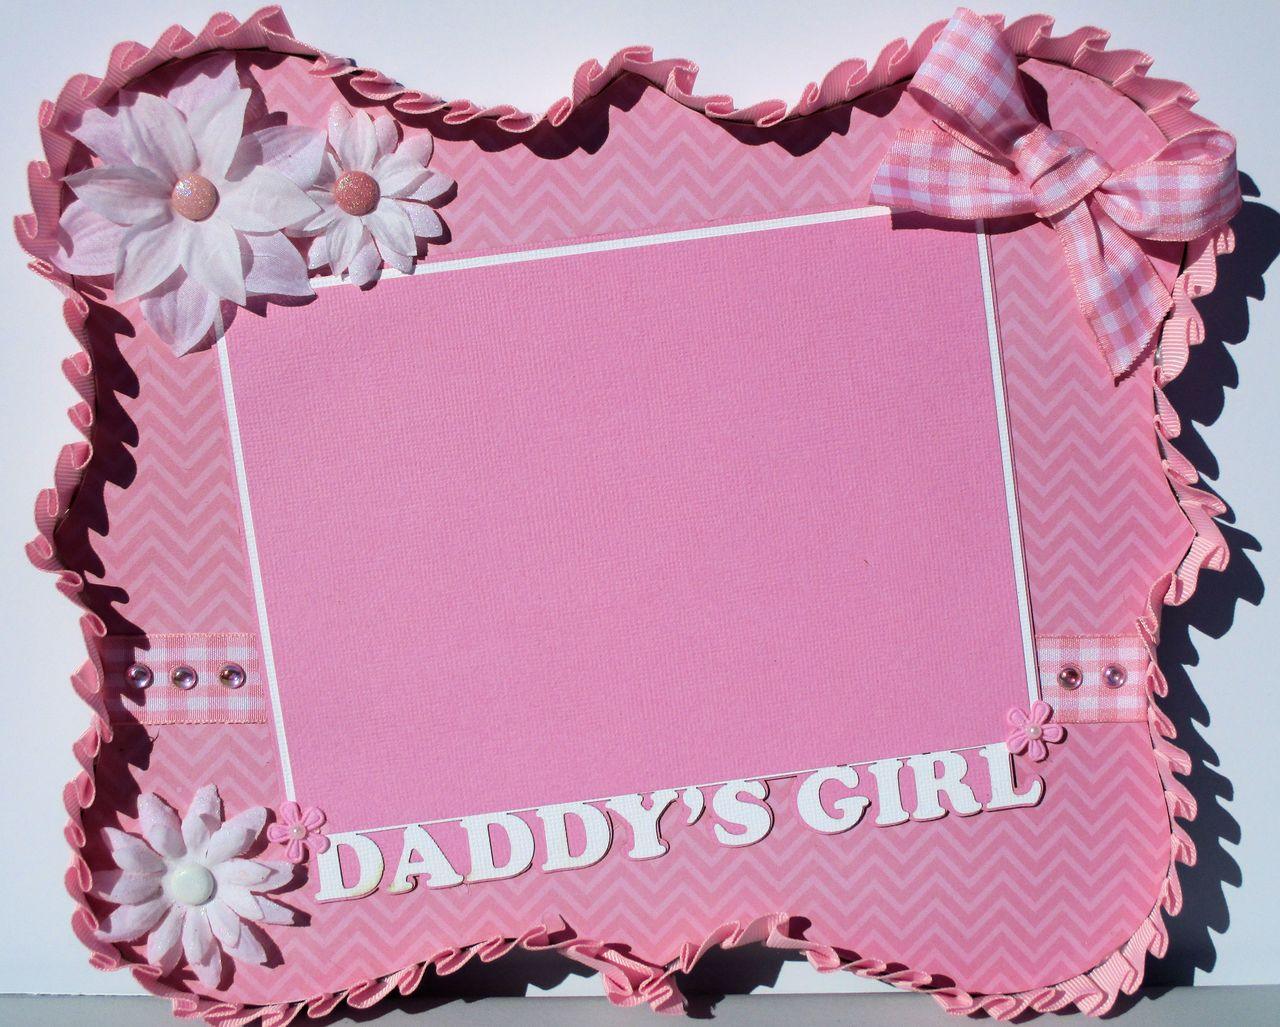 Daddy's Girl 9 x 11 Pink Gingham Photo Frame for 5 x 7 Photo by SSC Designs